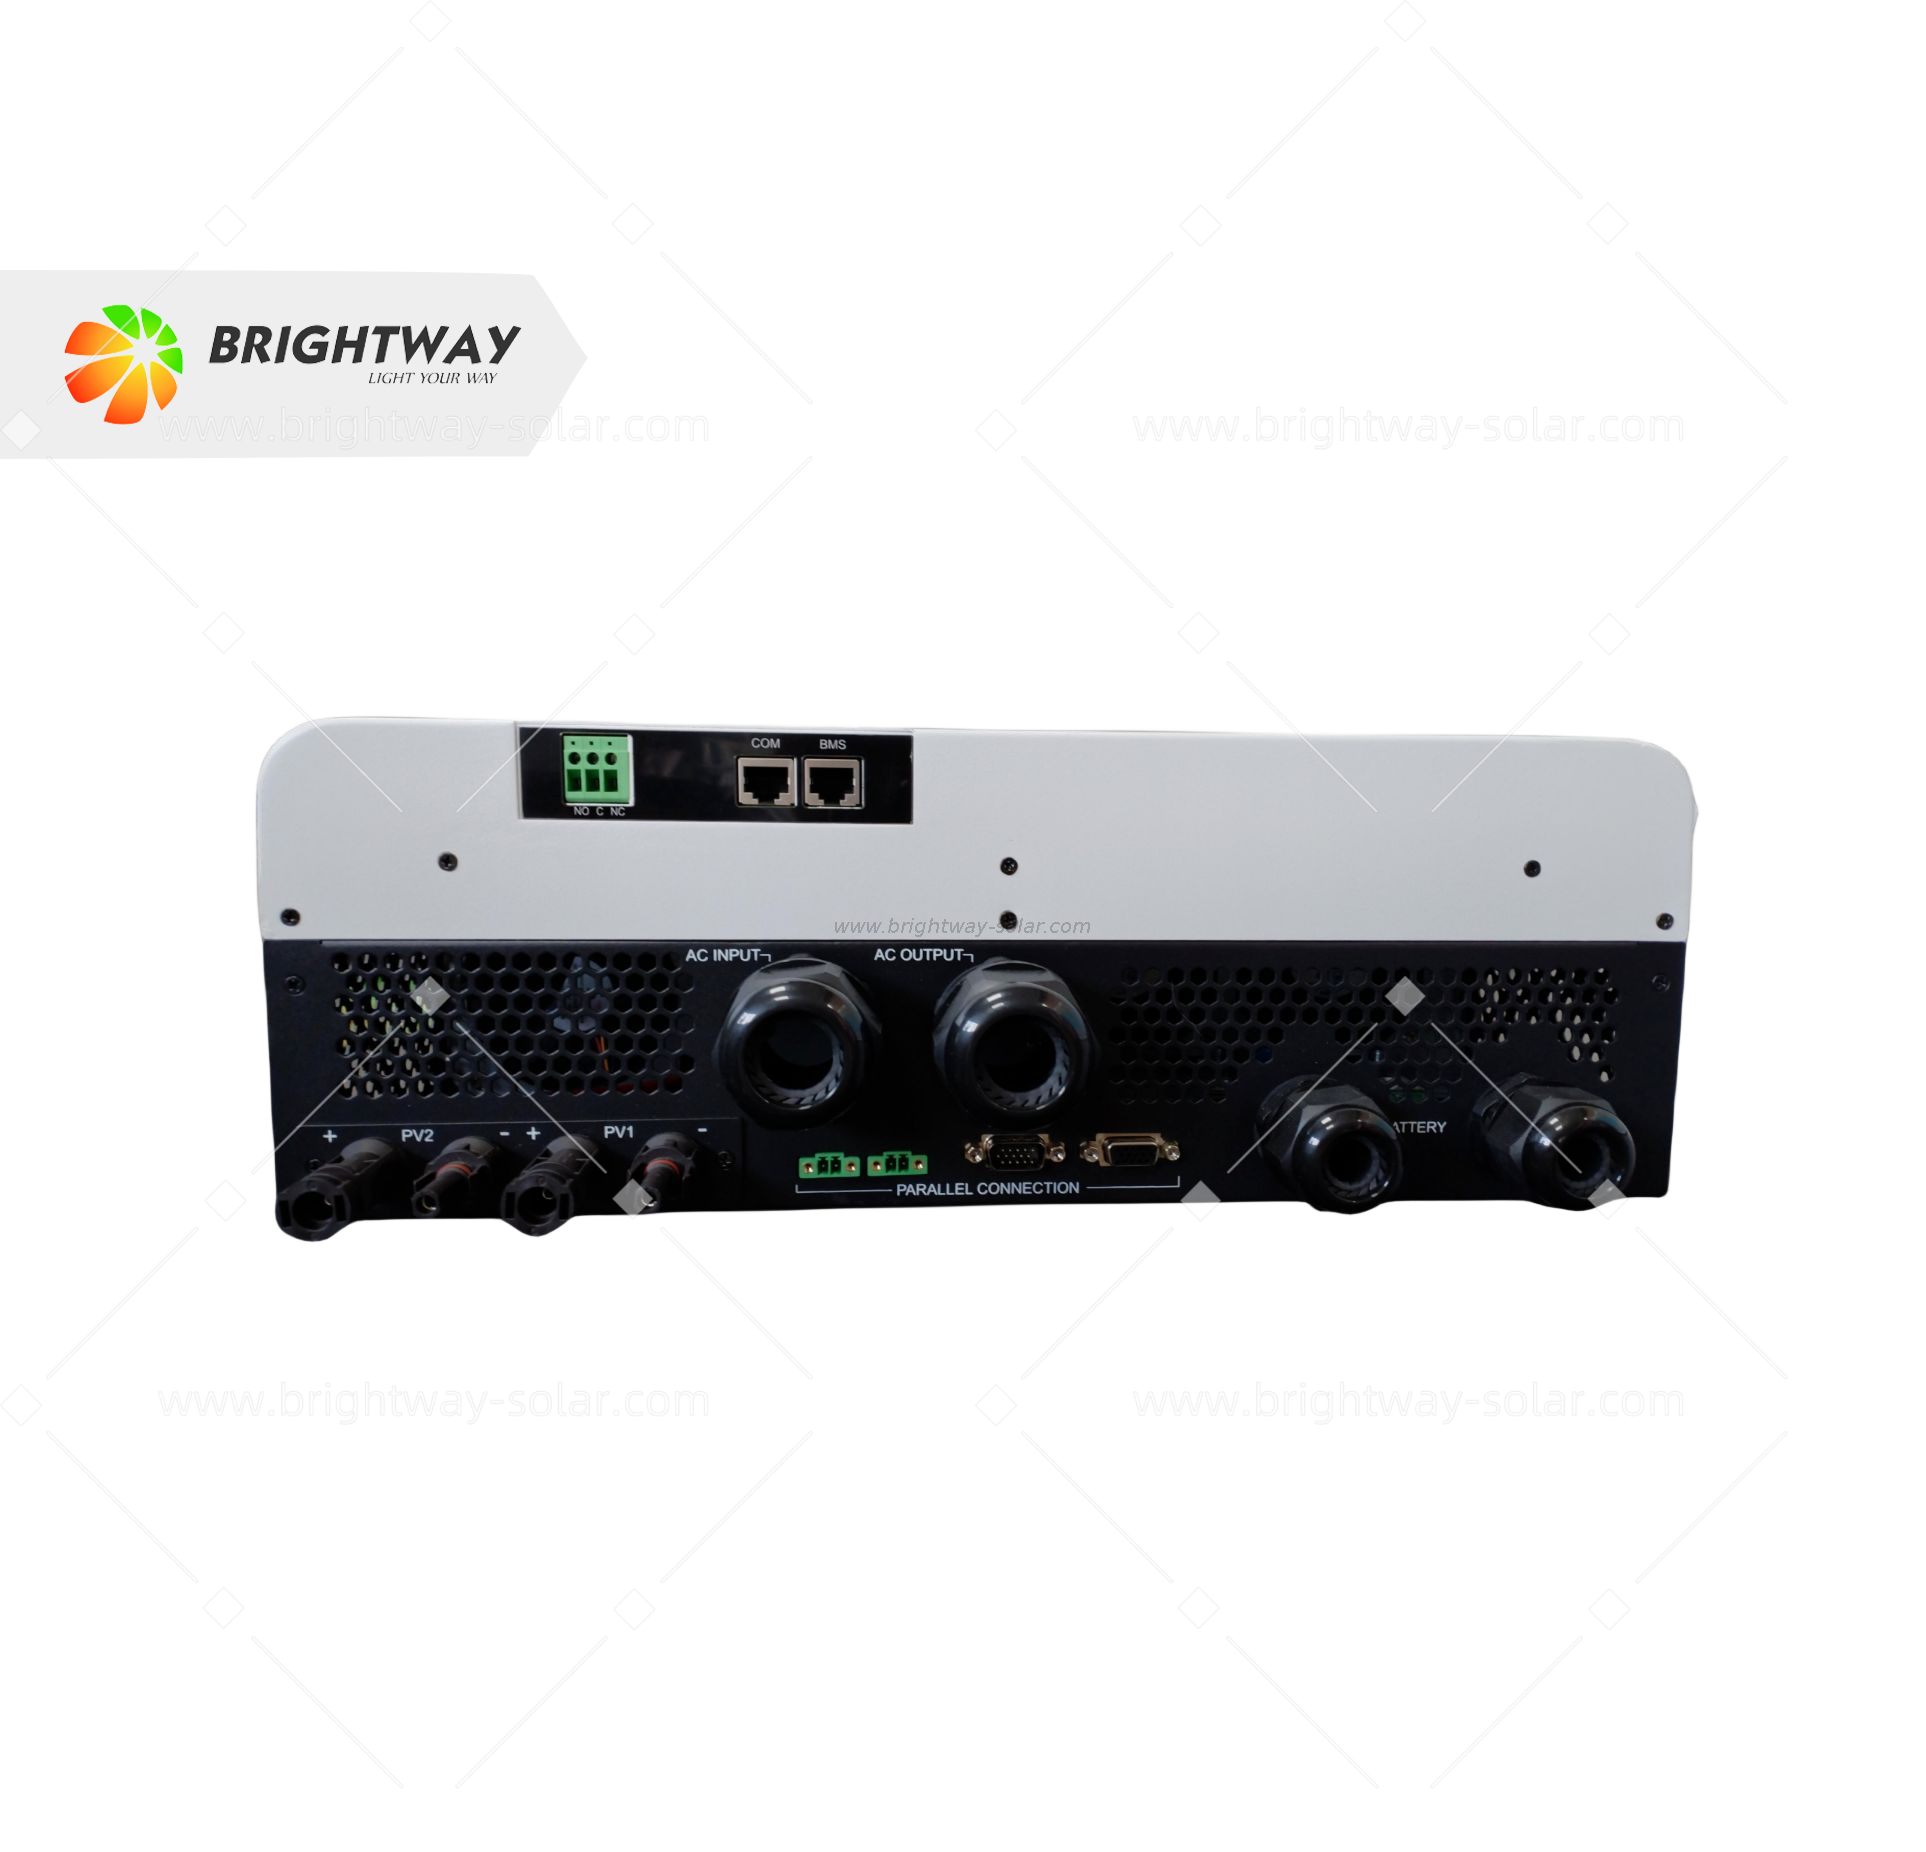 Brightway Single Phase DC/AC Inverter 11kW With LCD Screen for Solar Power System Home